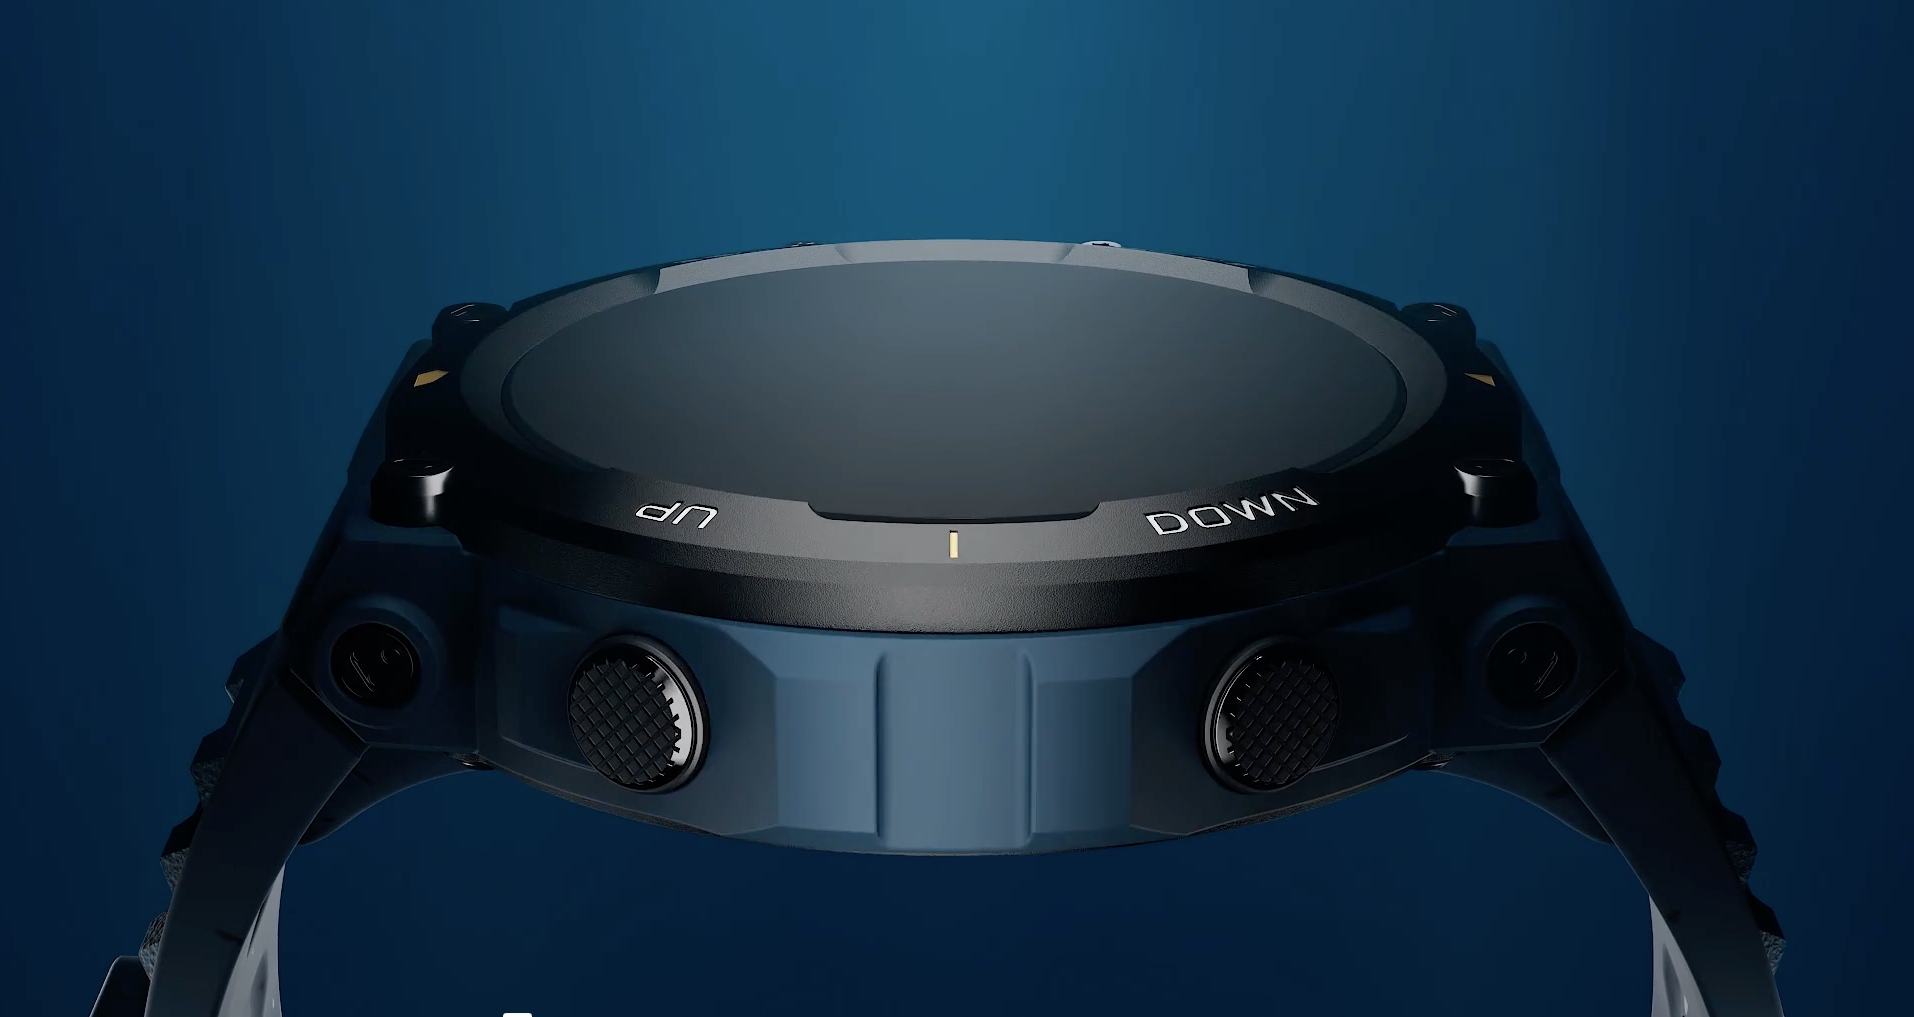 Huami reveals a special version of the Amazfit T-Rex 2 Ocean Blue smartwatch to celebrate World Oceans Day